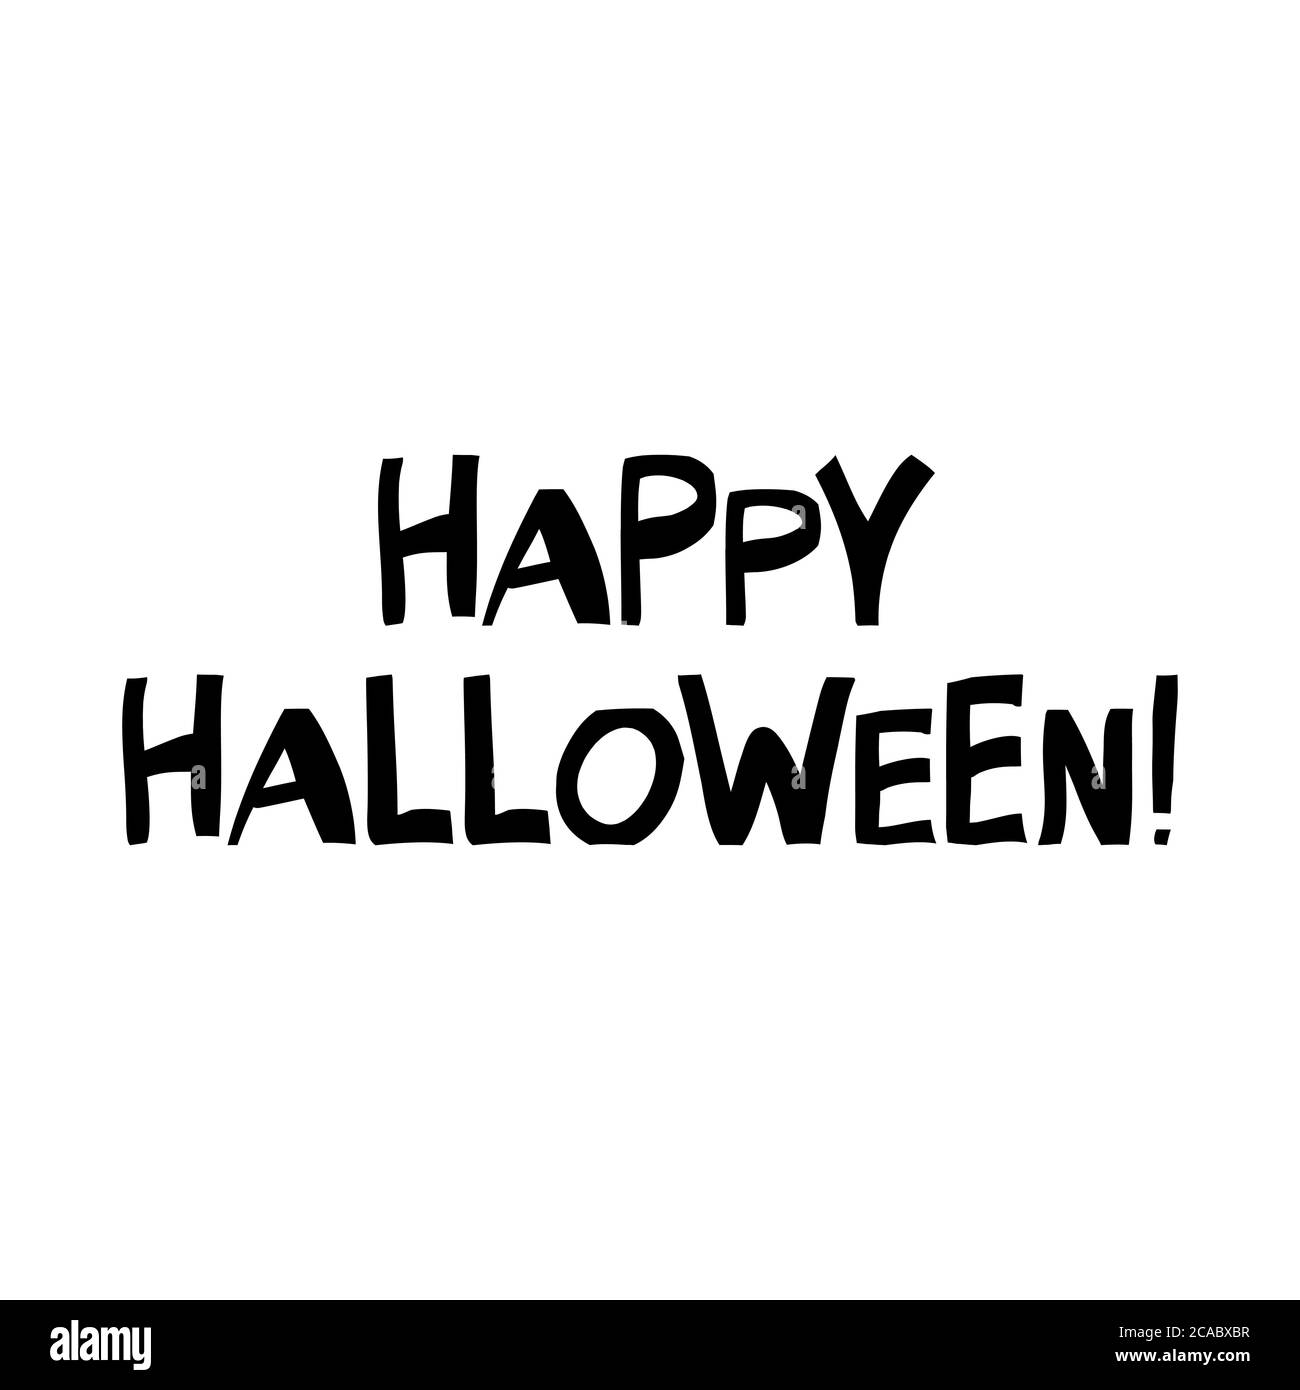 Happy Halloween quote. Cute hand drawn lettering in modern scandinavian style. Isolated on white background. Vector stock illustration. Stock Vector